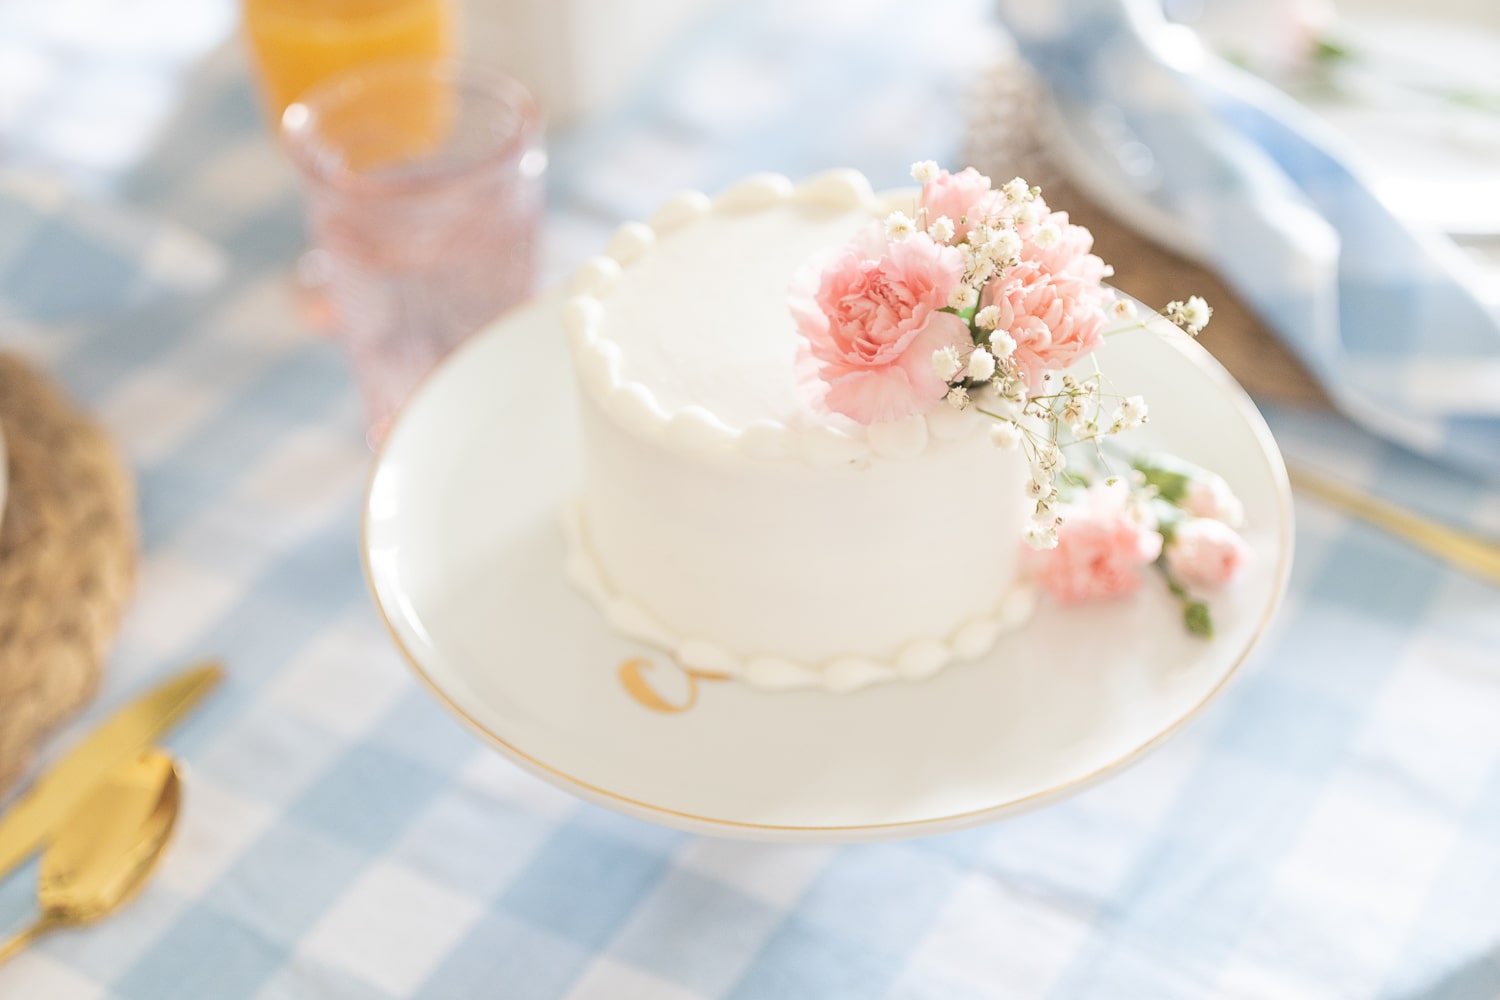 Pink carnation flowers on a cake idea by blogger Stephanie Ziajka on Diary of a Debutante